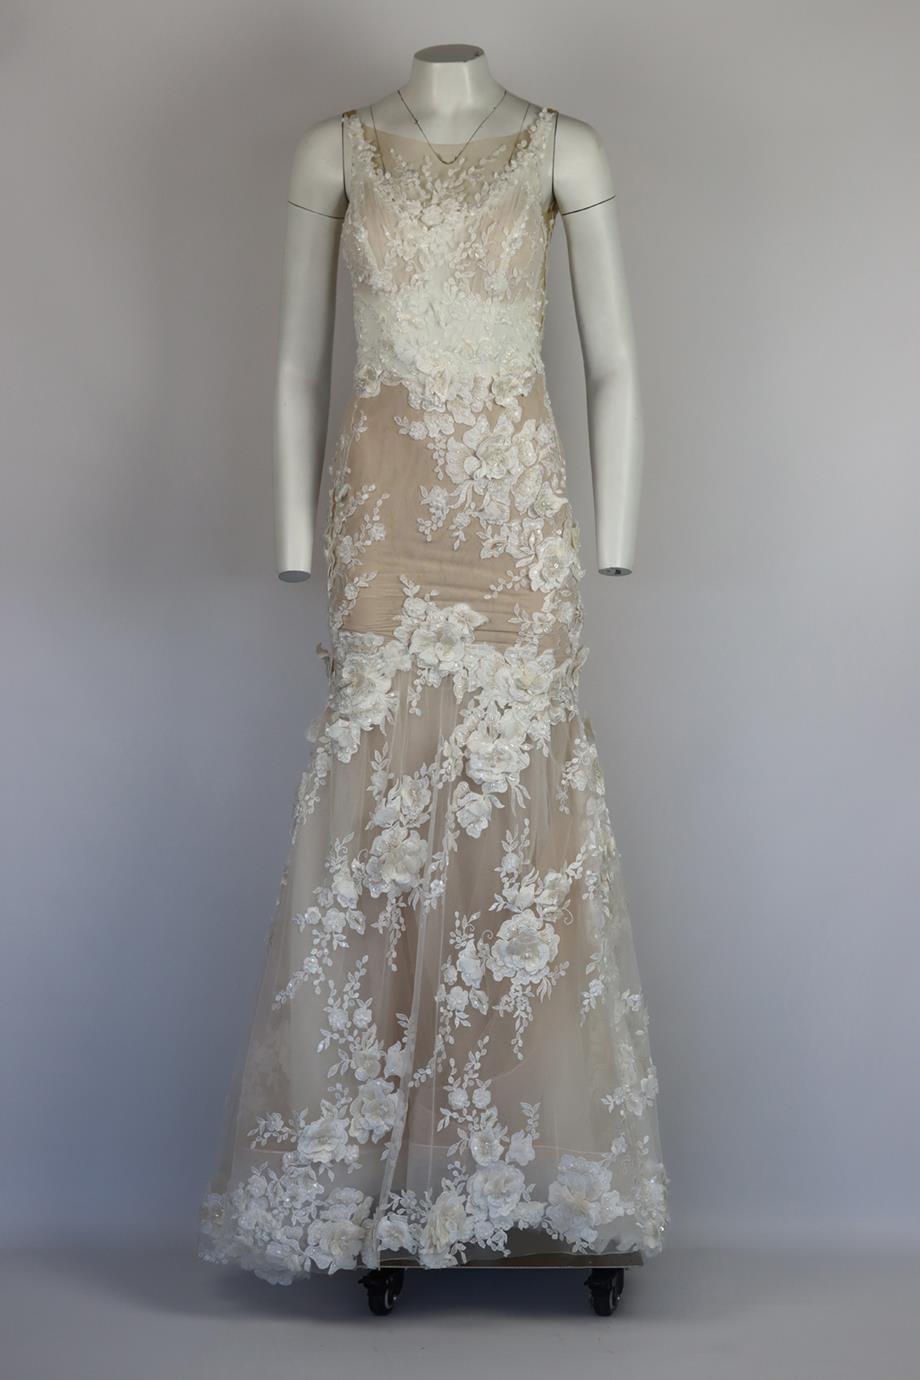 Galia Lahav embellished floral appliquéd tulle and silk wedding gown. White. Sleeveless, crewneck. Zip fastening at back. 72% Polyester, 28% silk. Comes with presentation box. Size: FR 44 (UK 16, IT 48, US 12). Bust: 25 in. Waist: 25 in. Hips: 30.2